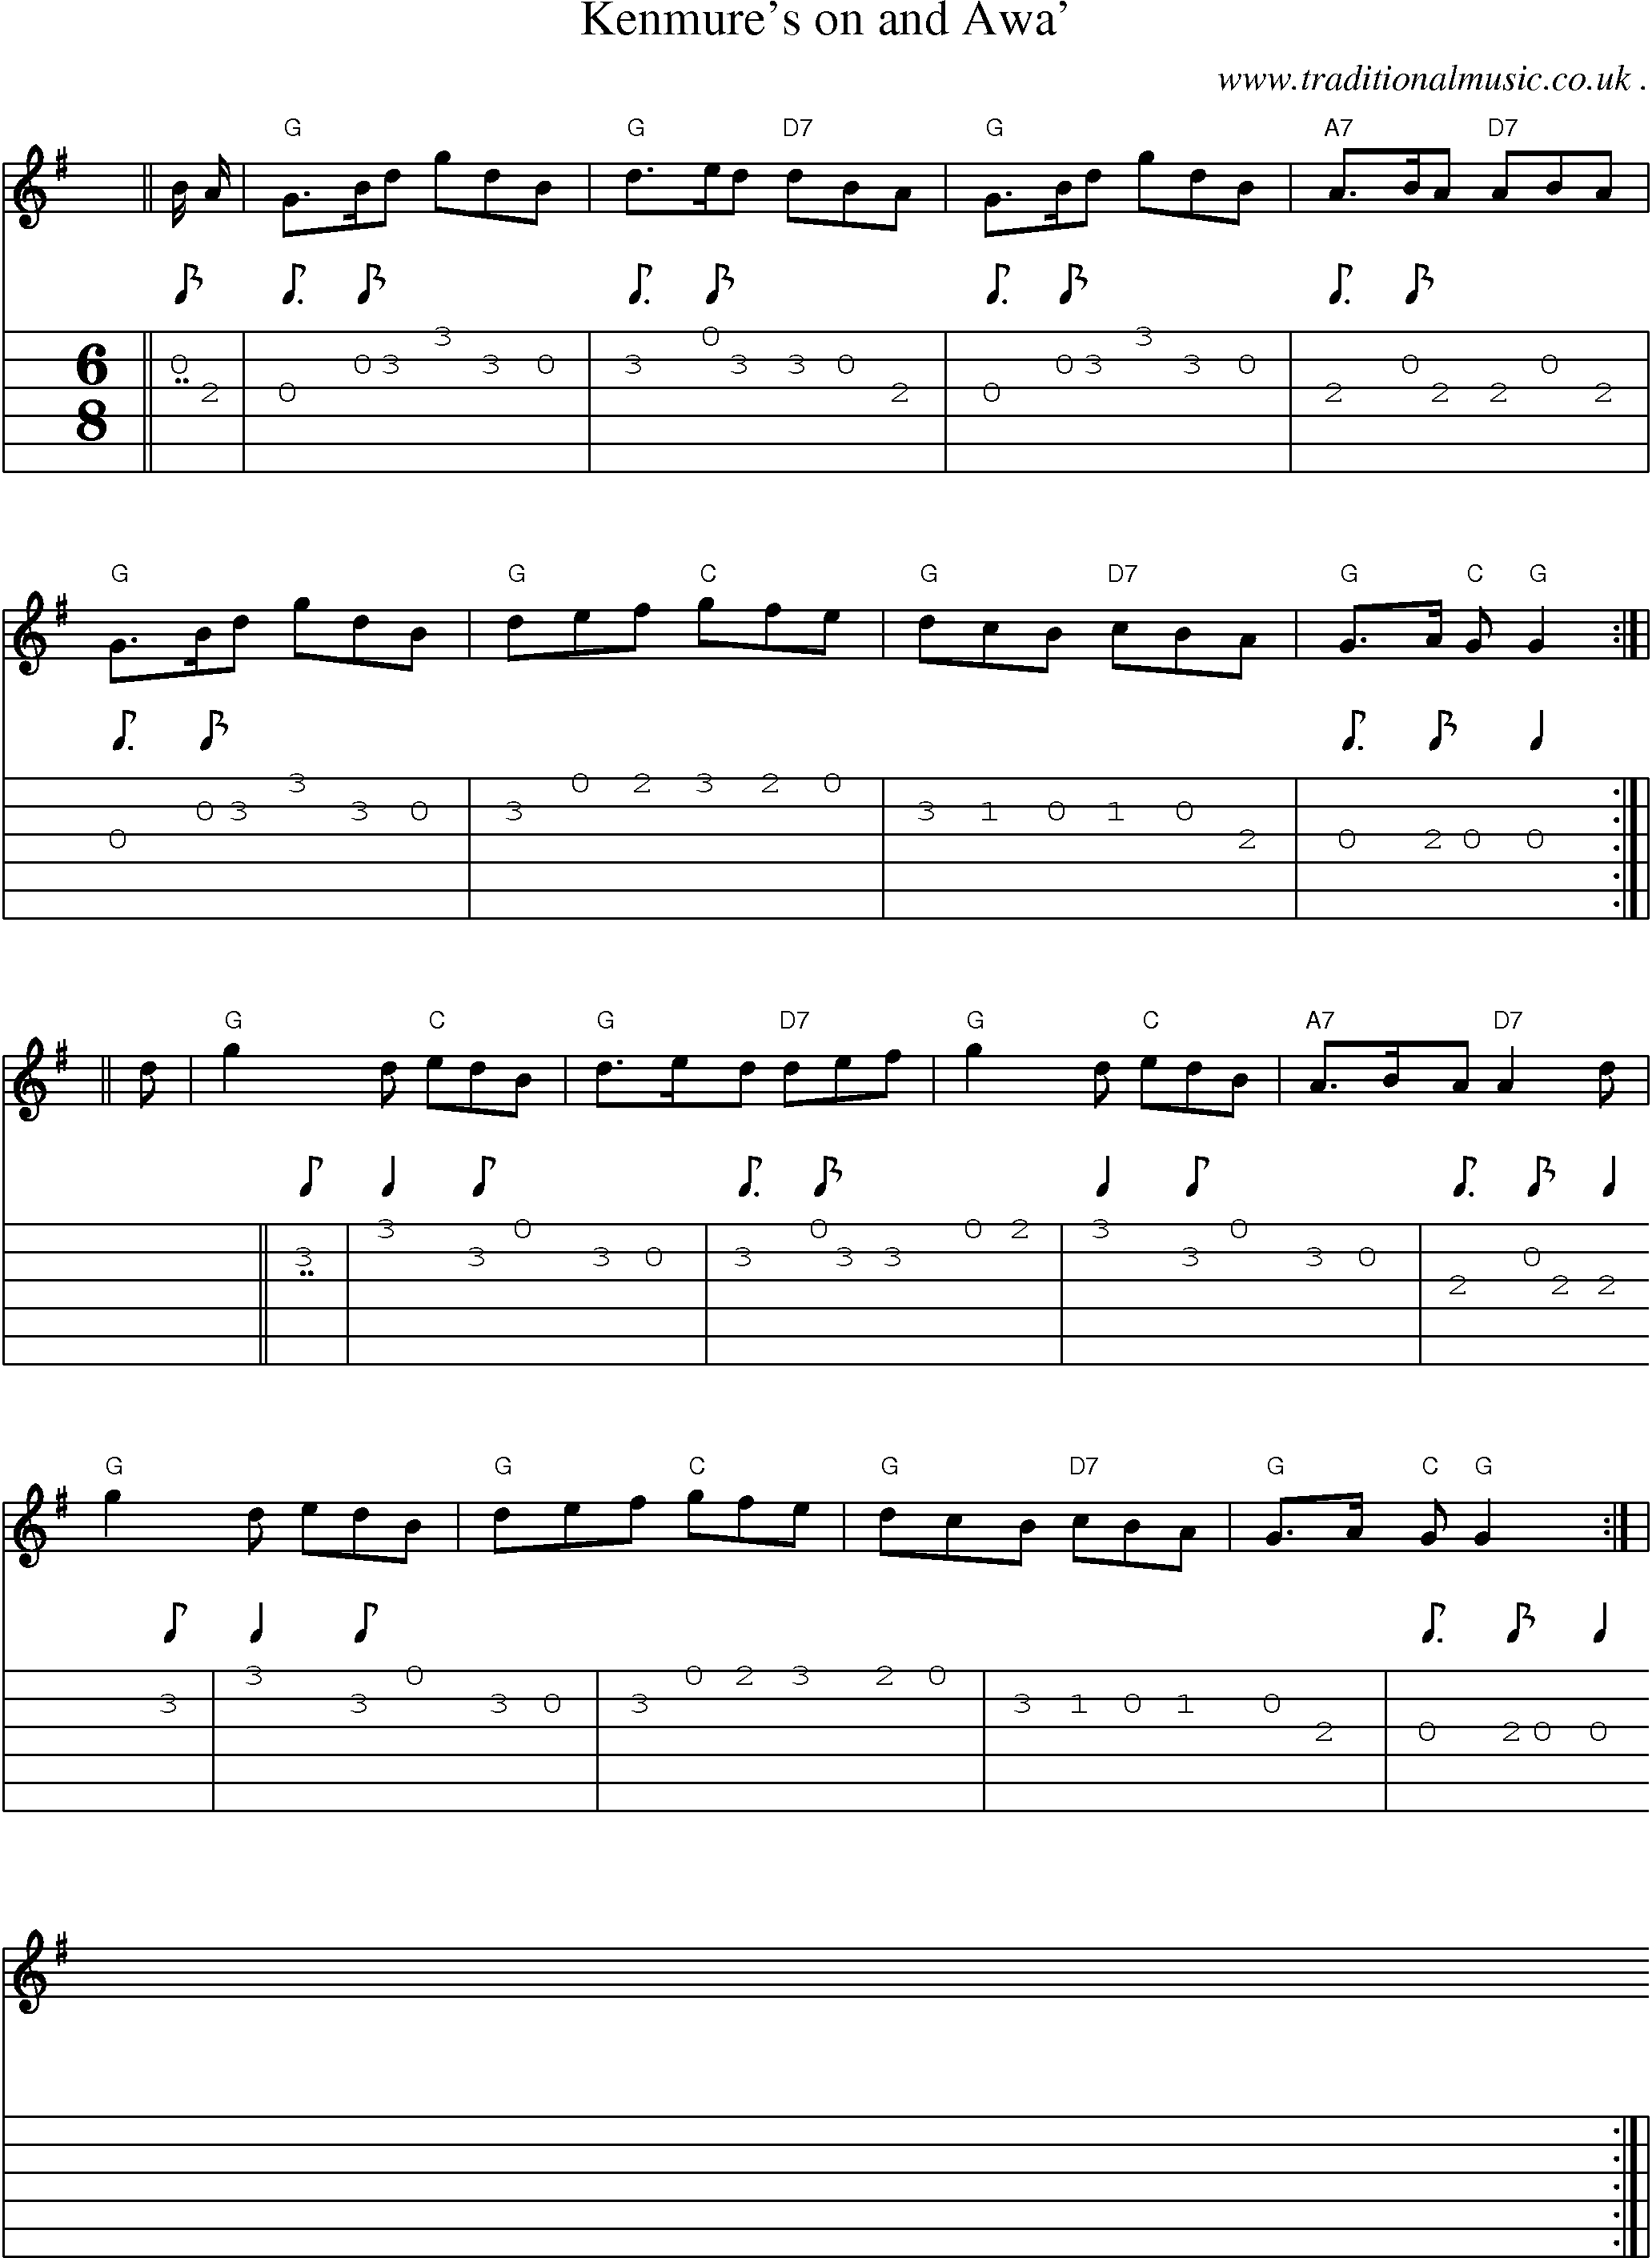 Sheet-music  score, Chords and Guitar Tabs for Kenmures On And Awa